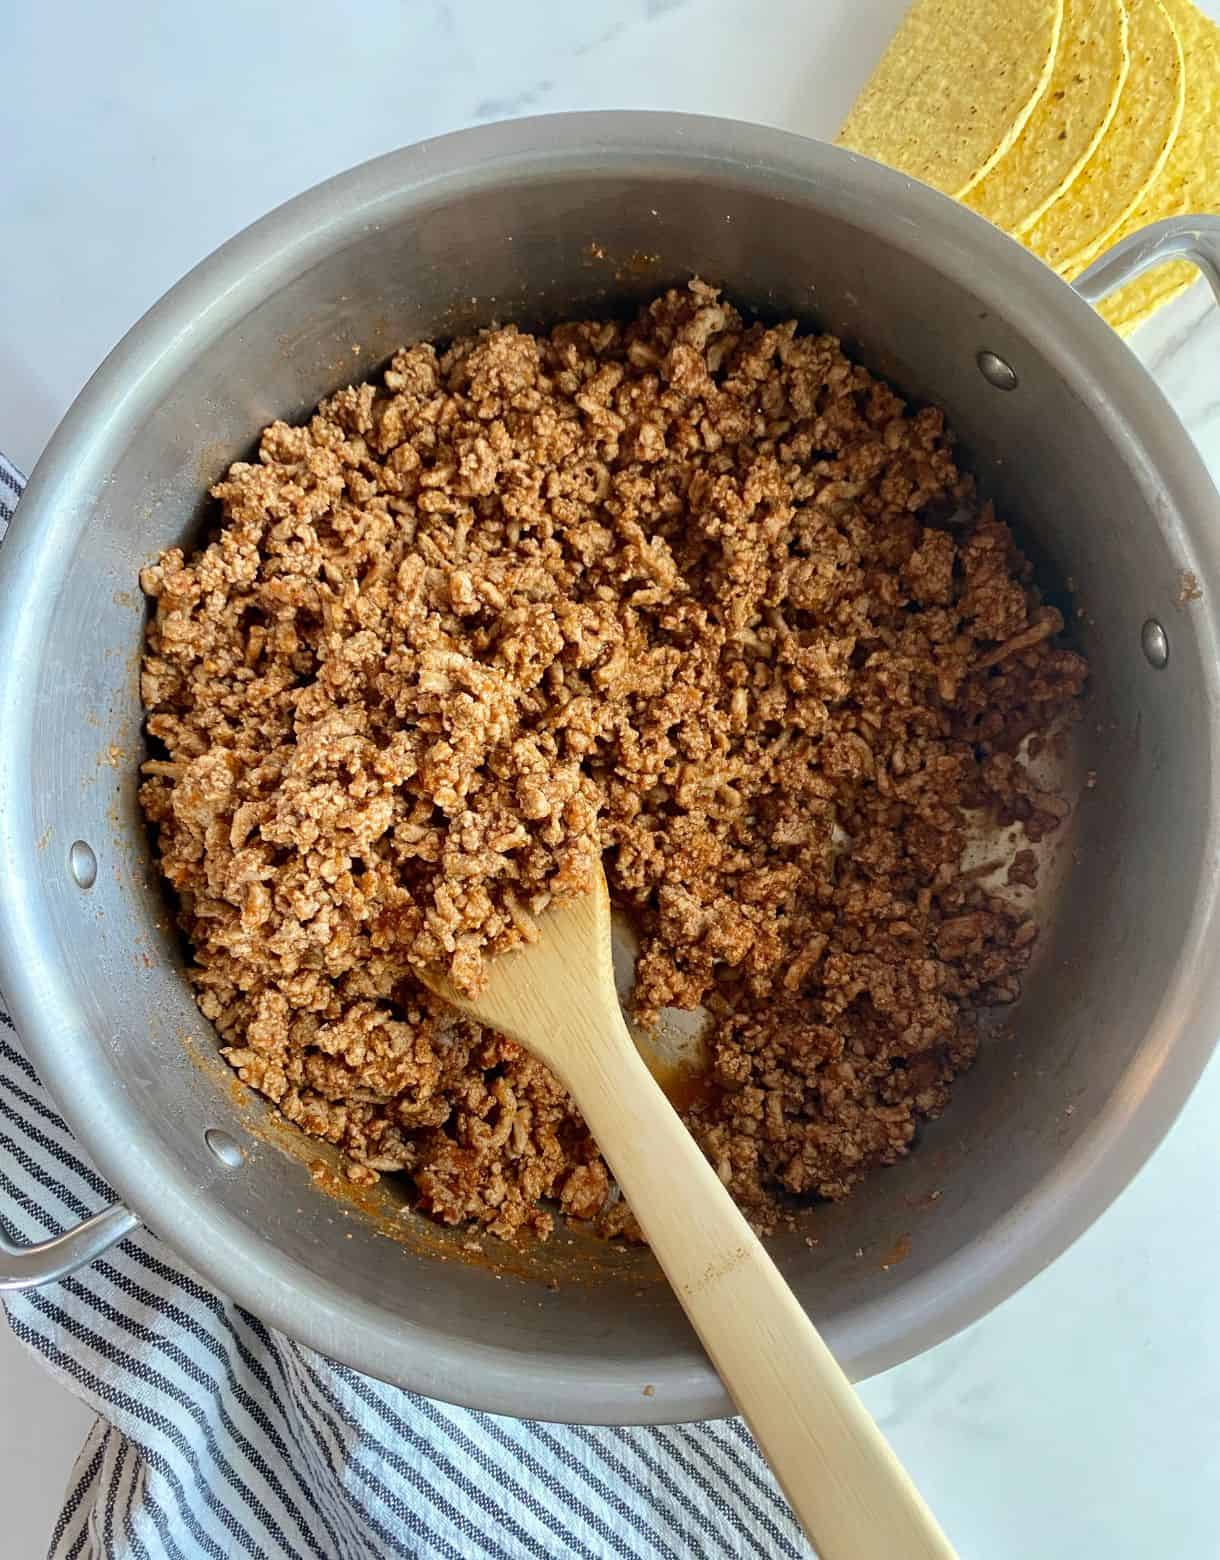 A skillet of cooked Ground Turkey Taco Meat.